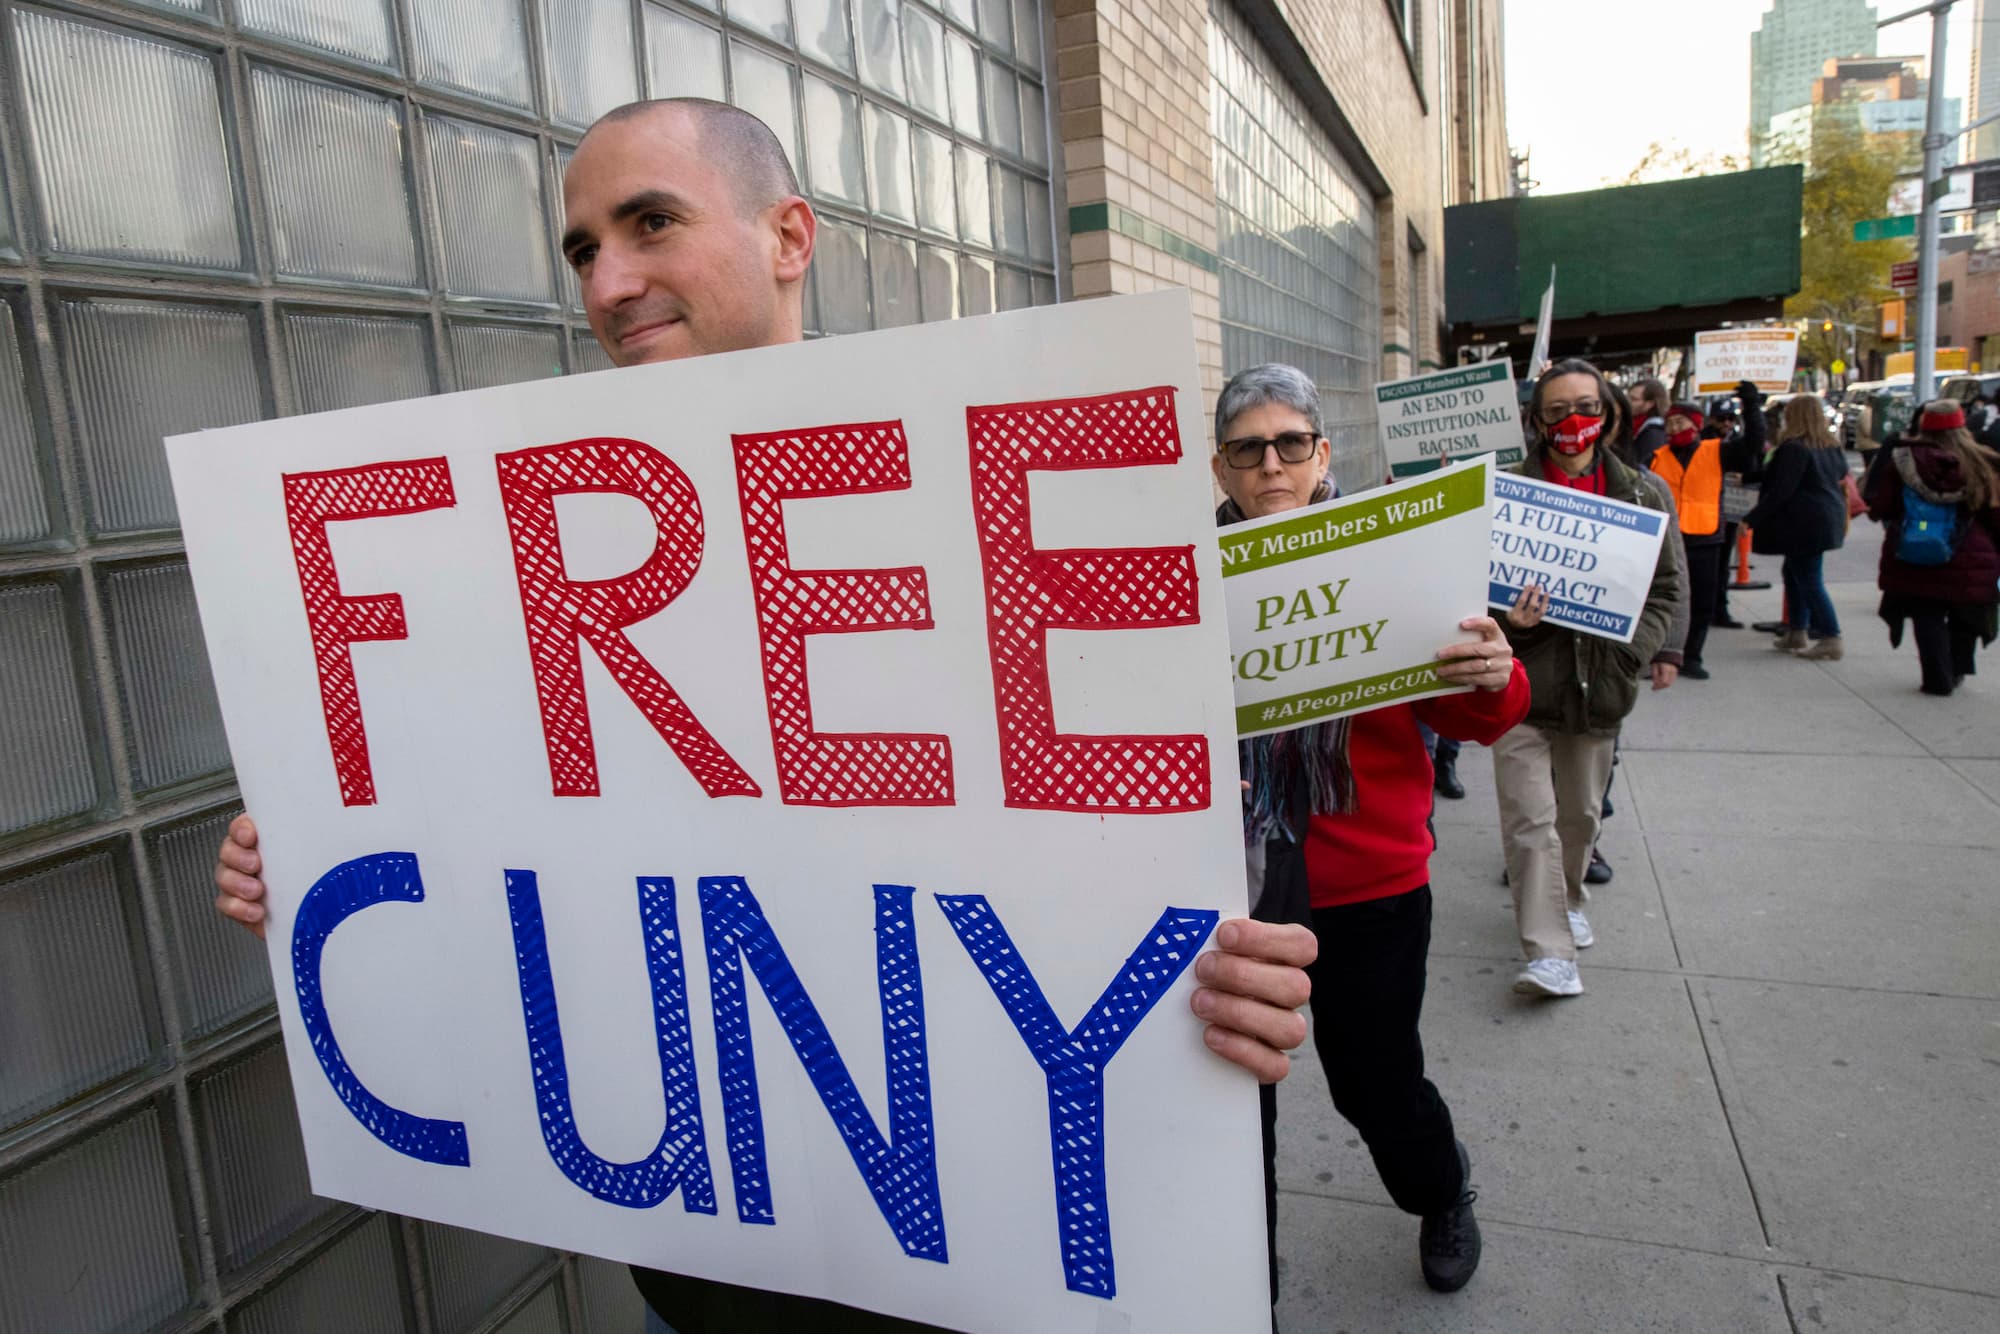 Rally prior to the Dec 2022 CUNY BOT Budget Request Hearing at LaGuardia Community College